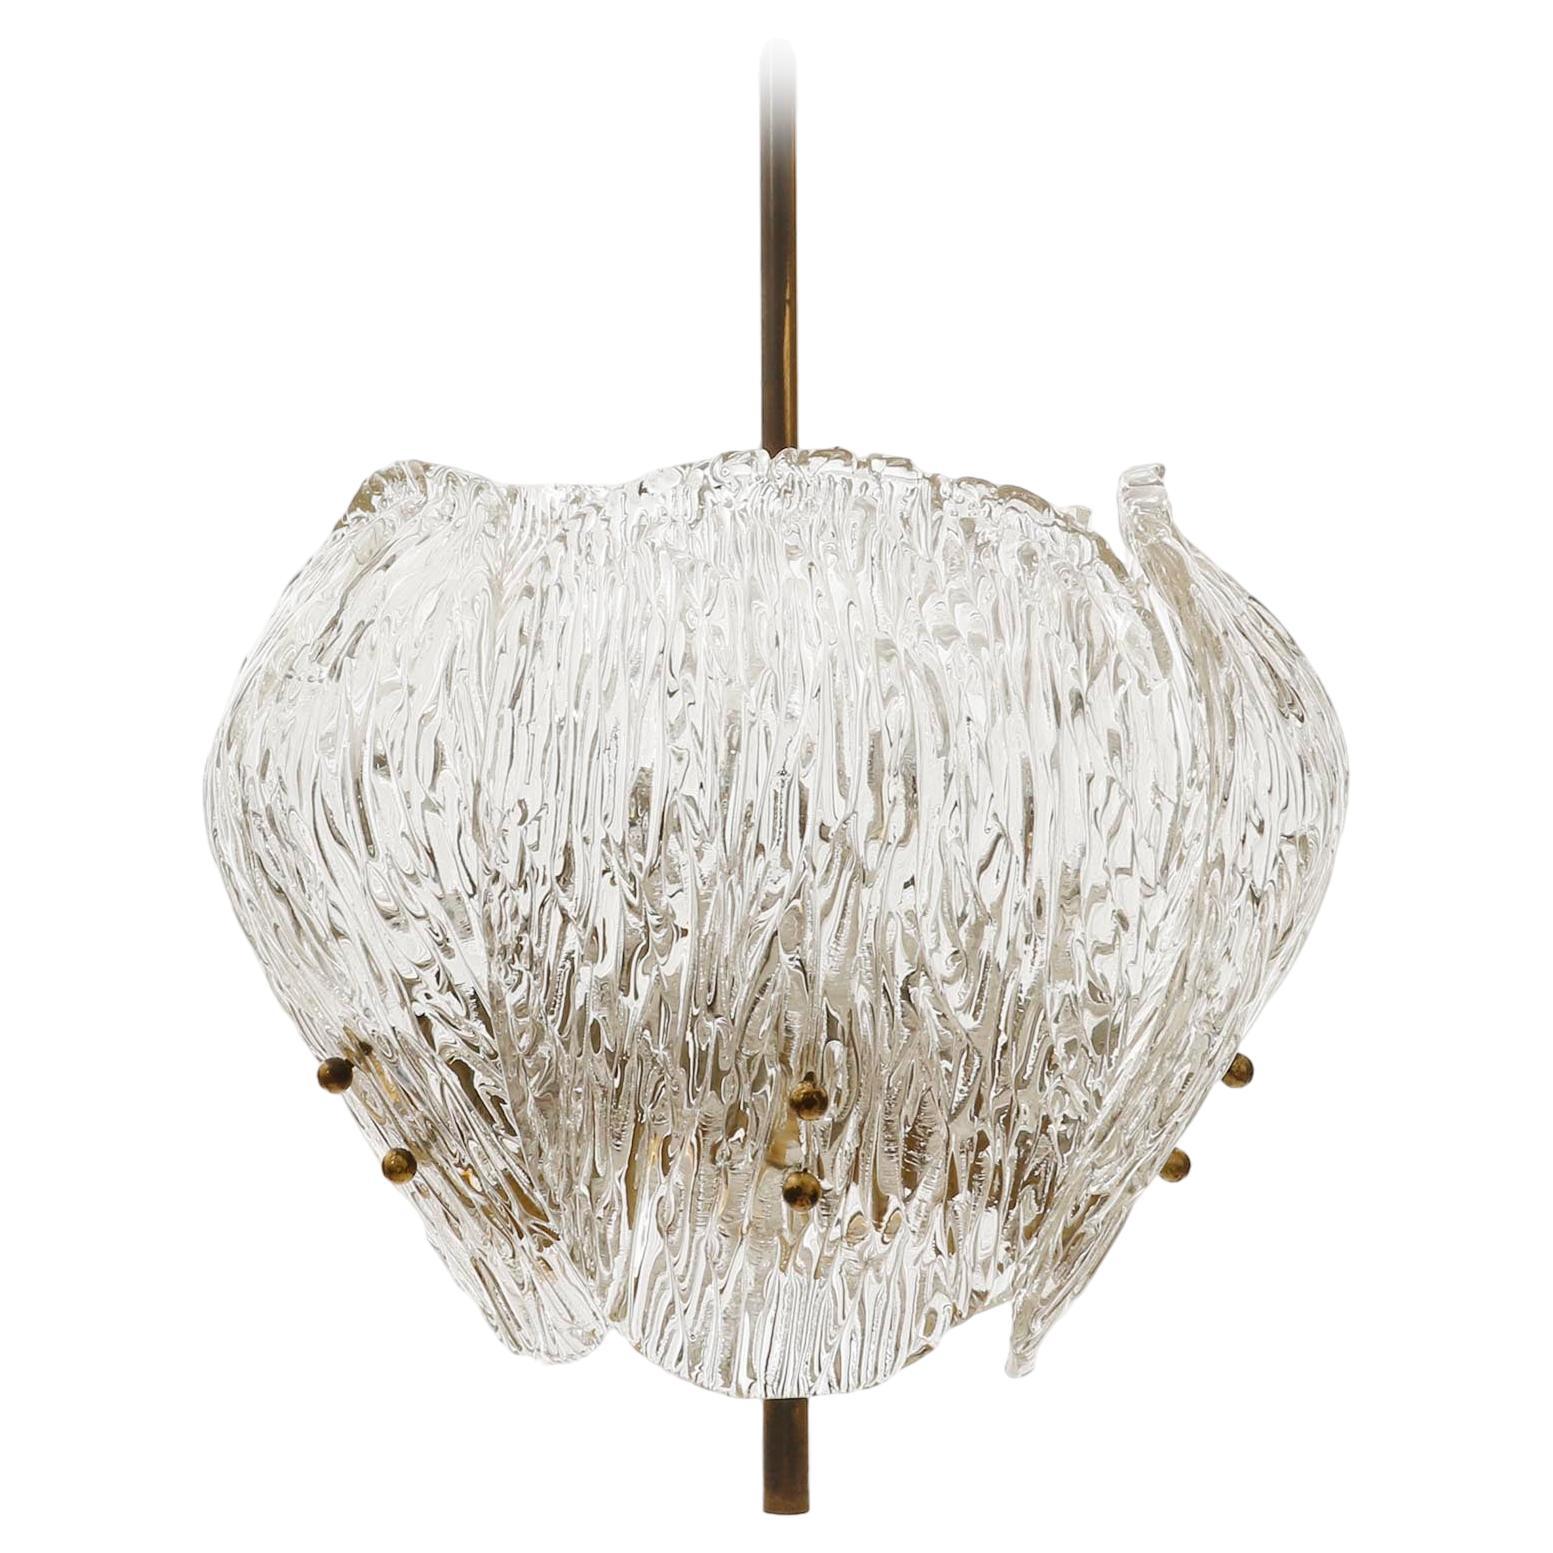 A beautiful light fixture by J.T. Kalmar, Austria, manufactured in Mid-Century, circa 1960 (late 1950s to early 1960s). 
It is made of five pressed and textured glass pieces in the form of shells or clams and solid polished brass with an aged